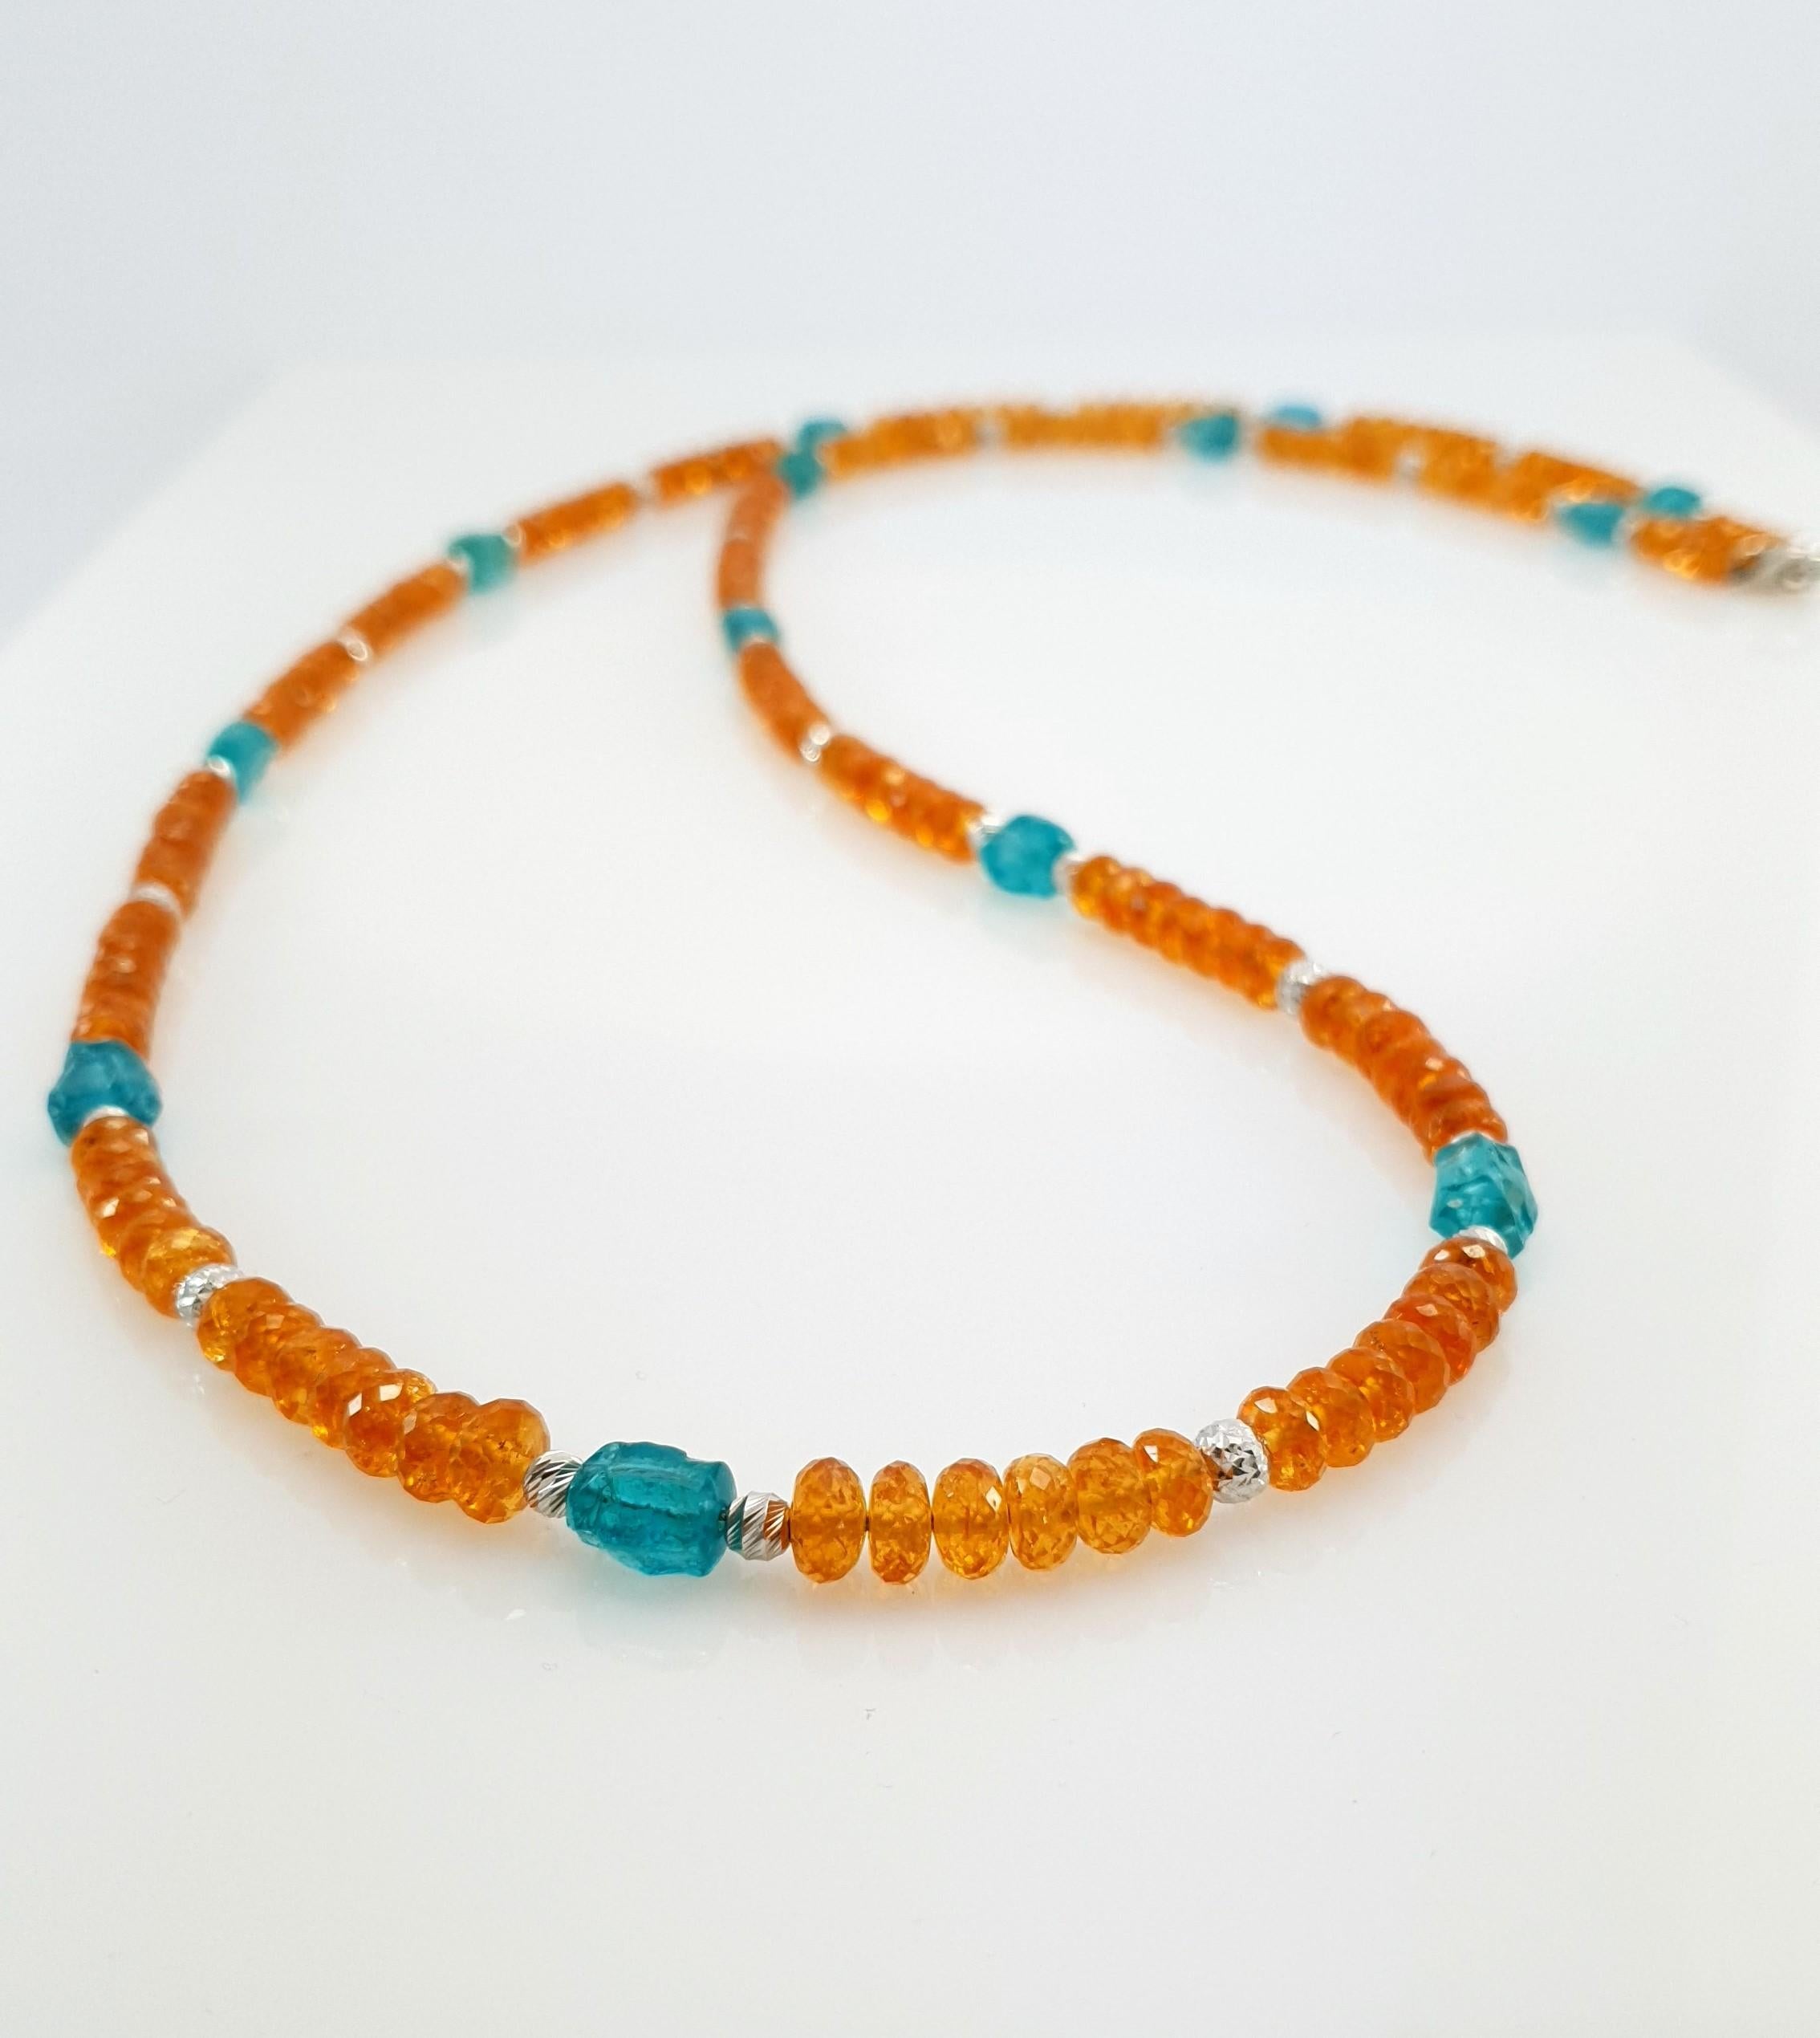 Orange Garnets and Paraiba Color Apatite Beads Necklace with 18 Carat White Gold 4